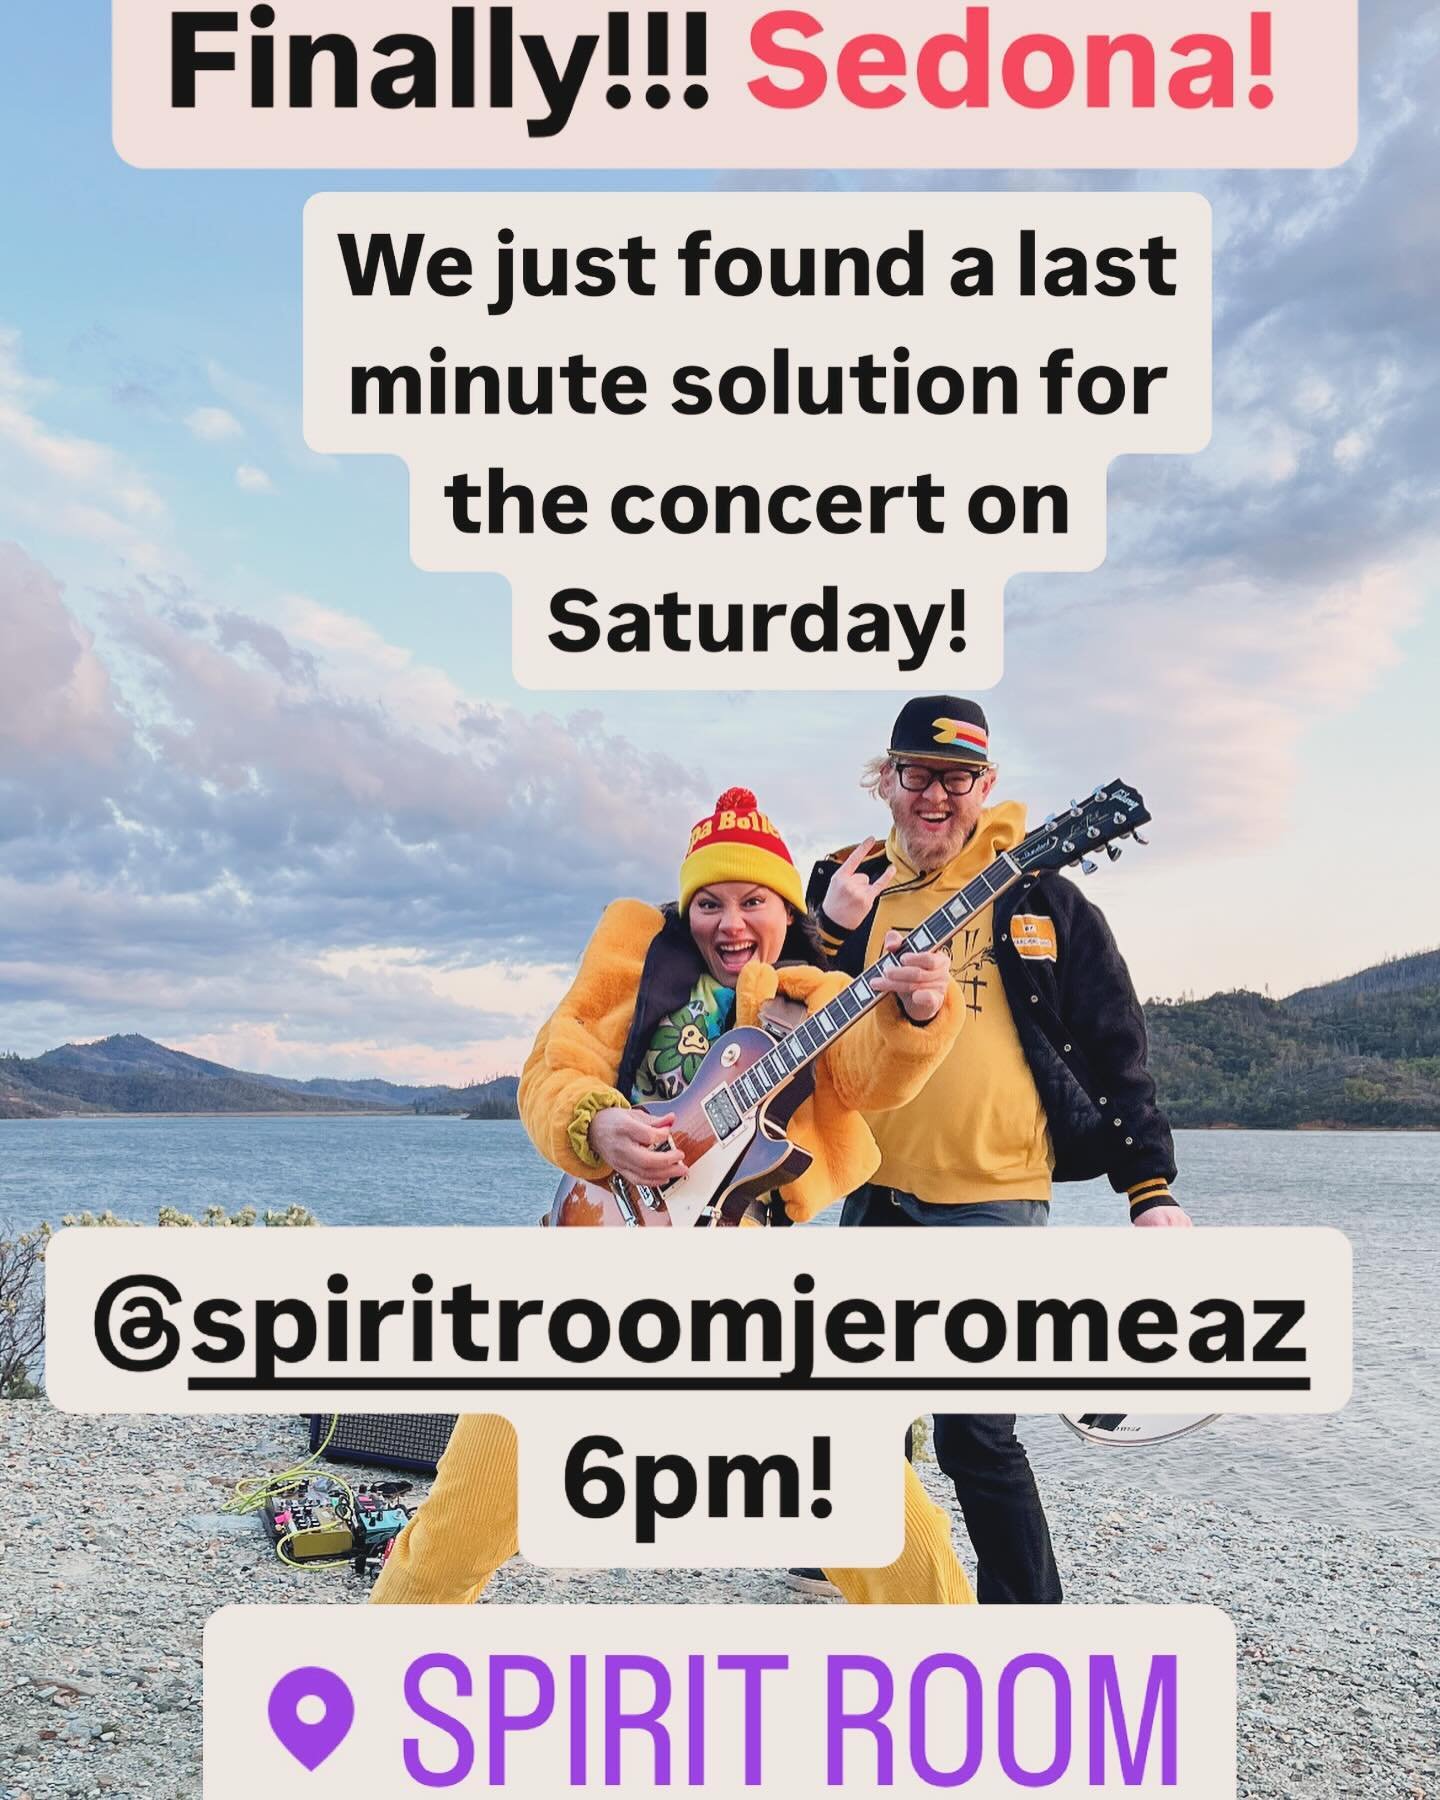 Sedona Saturday April 20th : We just found a last resort solution as we are speaking! Just a small concert at the Spirit Room @spiritroomjeromeaz in Jerome Arizona! We start 6pm and play for 45minutes. Just a short set,before some other bands hit the